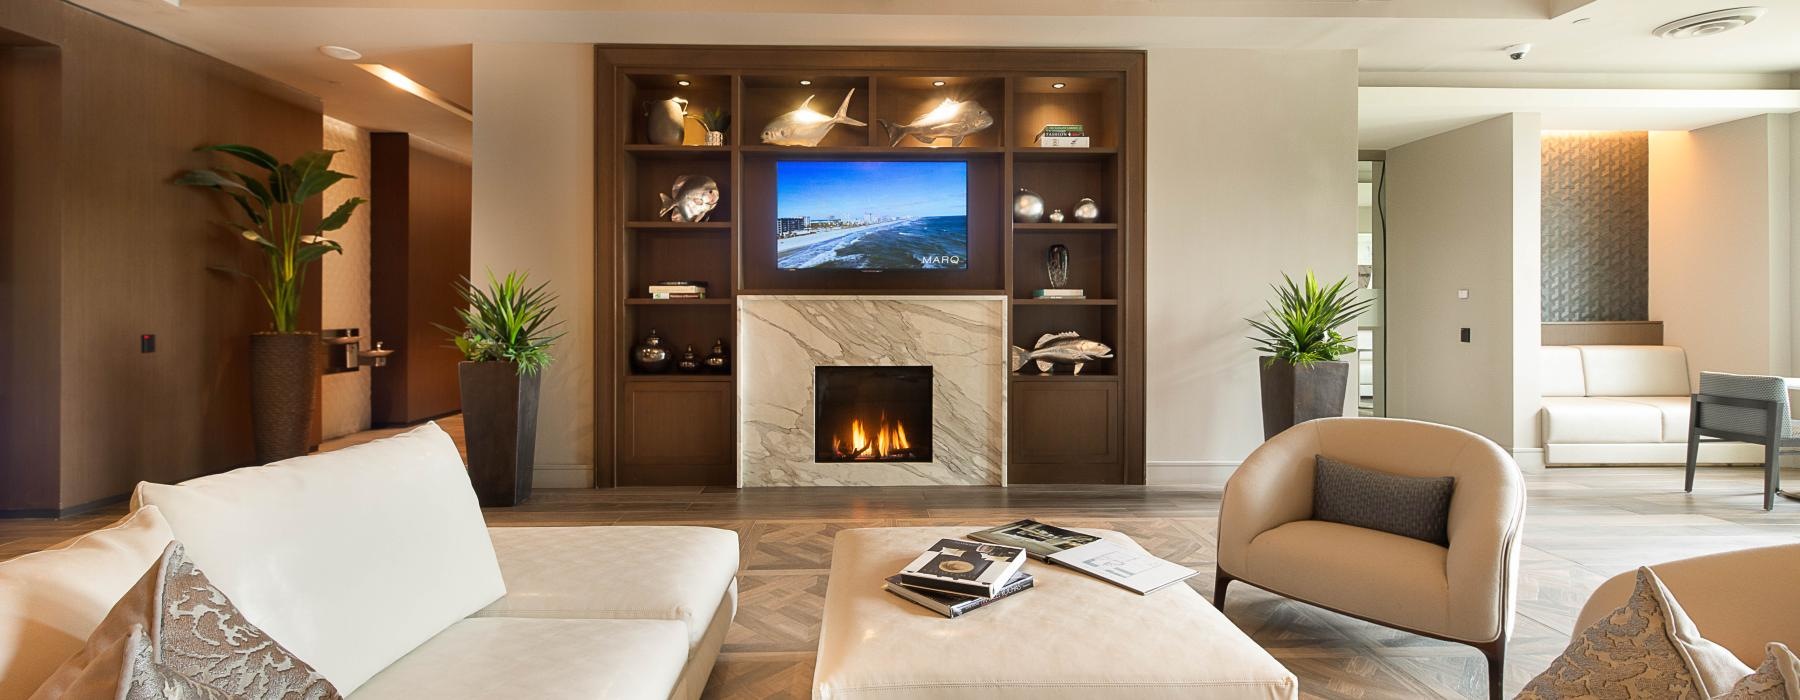 lounge area with a TV and modern decor